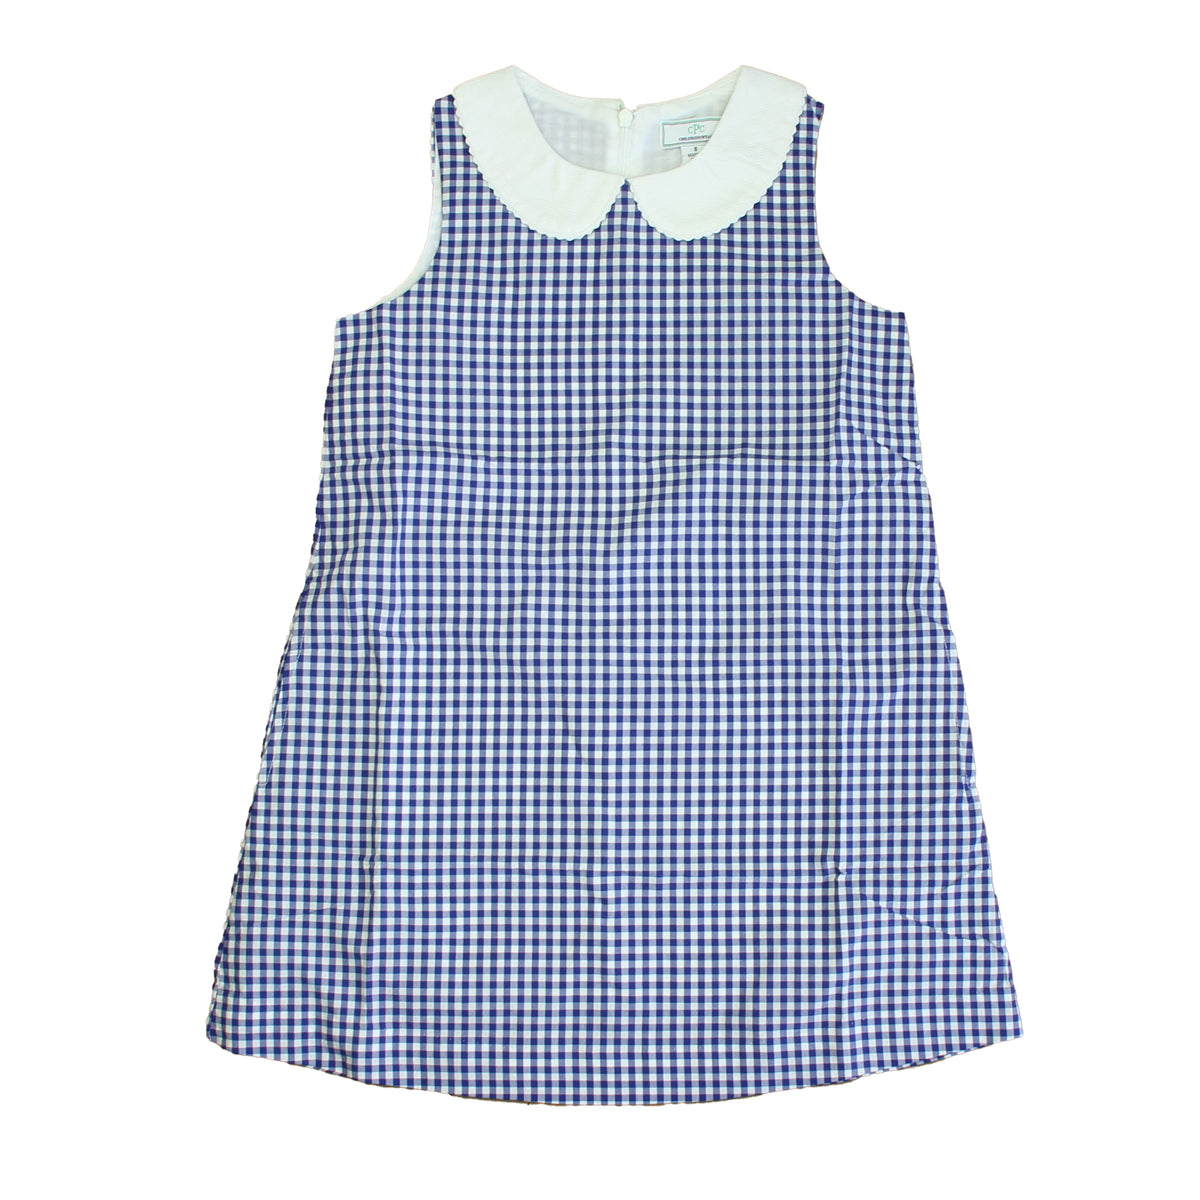 New with Tags: Bright Blue Gingham Dress size: 6-14 Years -- FINAL SALE